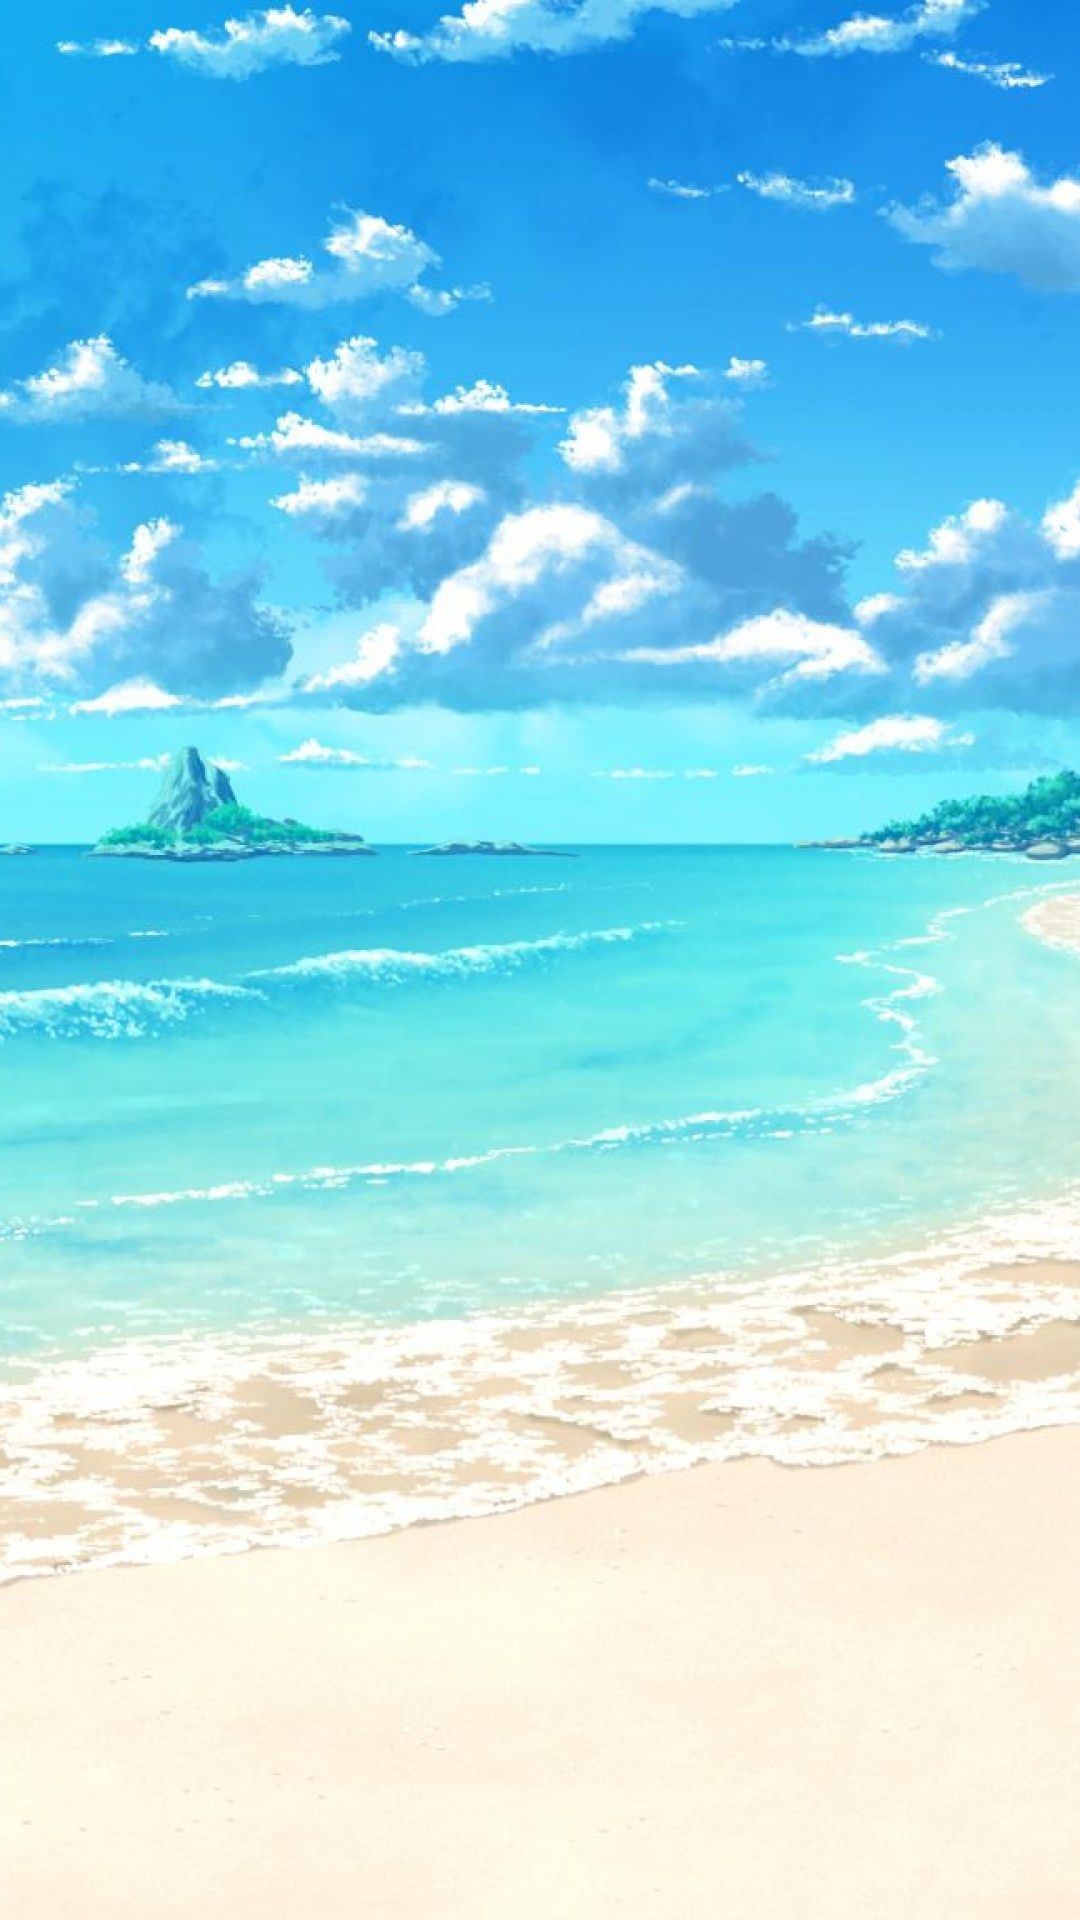 Bewitching Anime Scenery  Vibrant Summer Beach by Hachim202 on DeviantArt